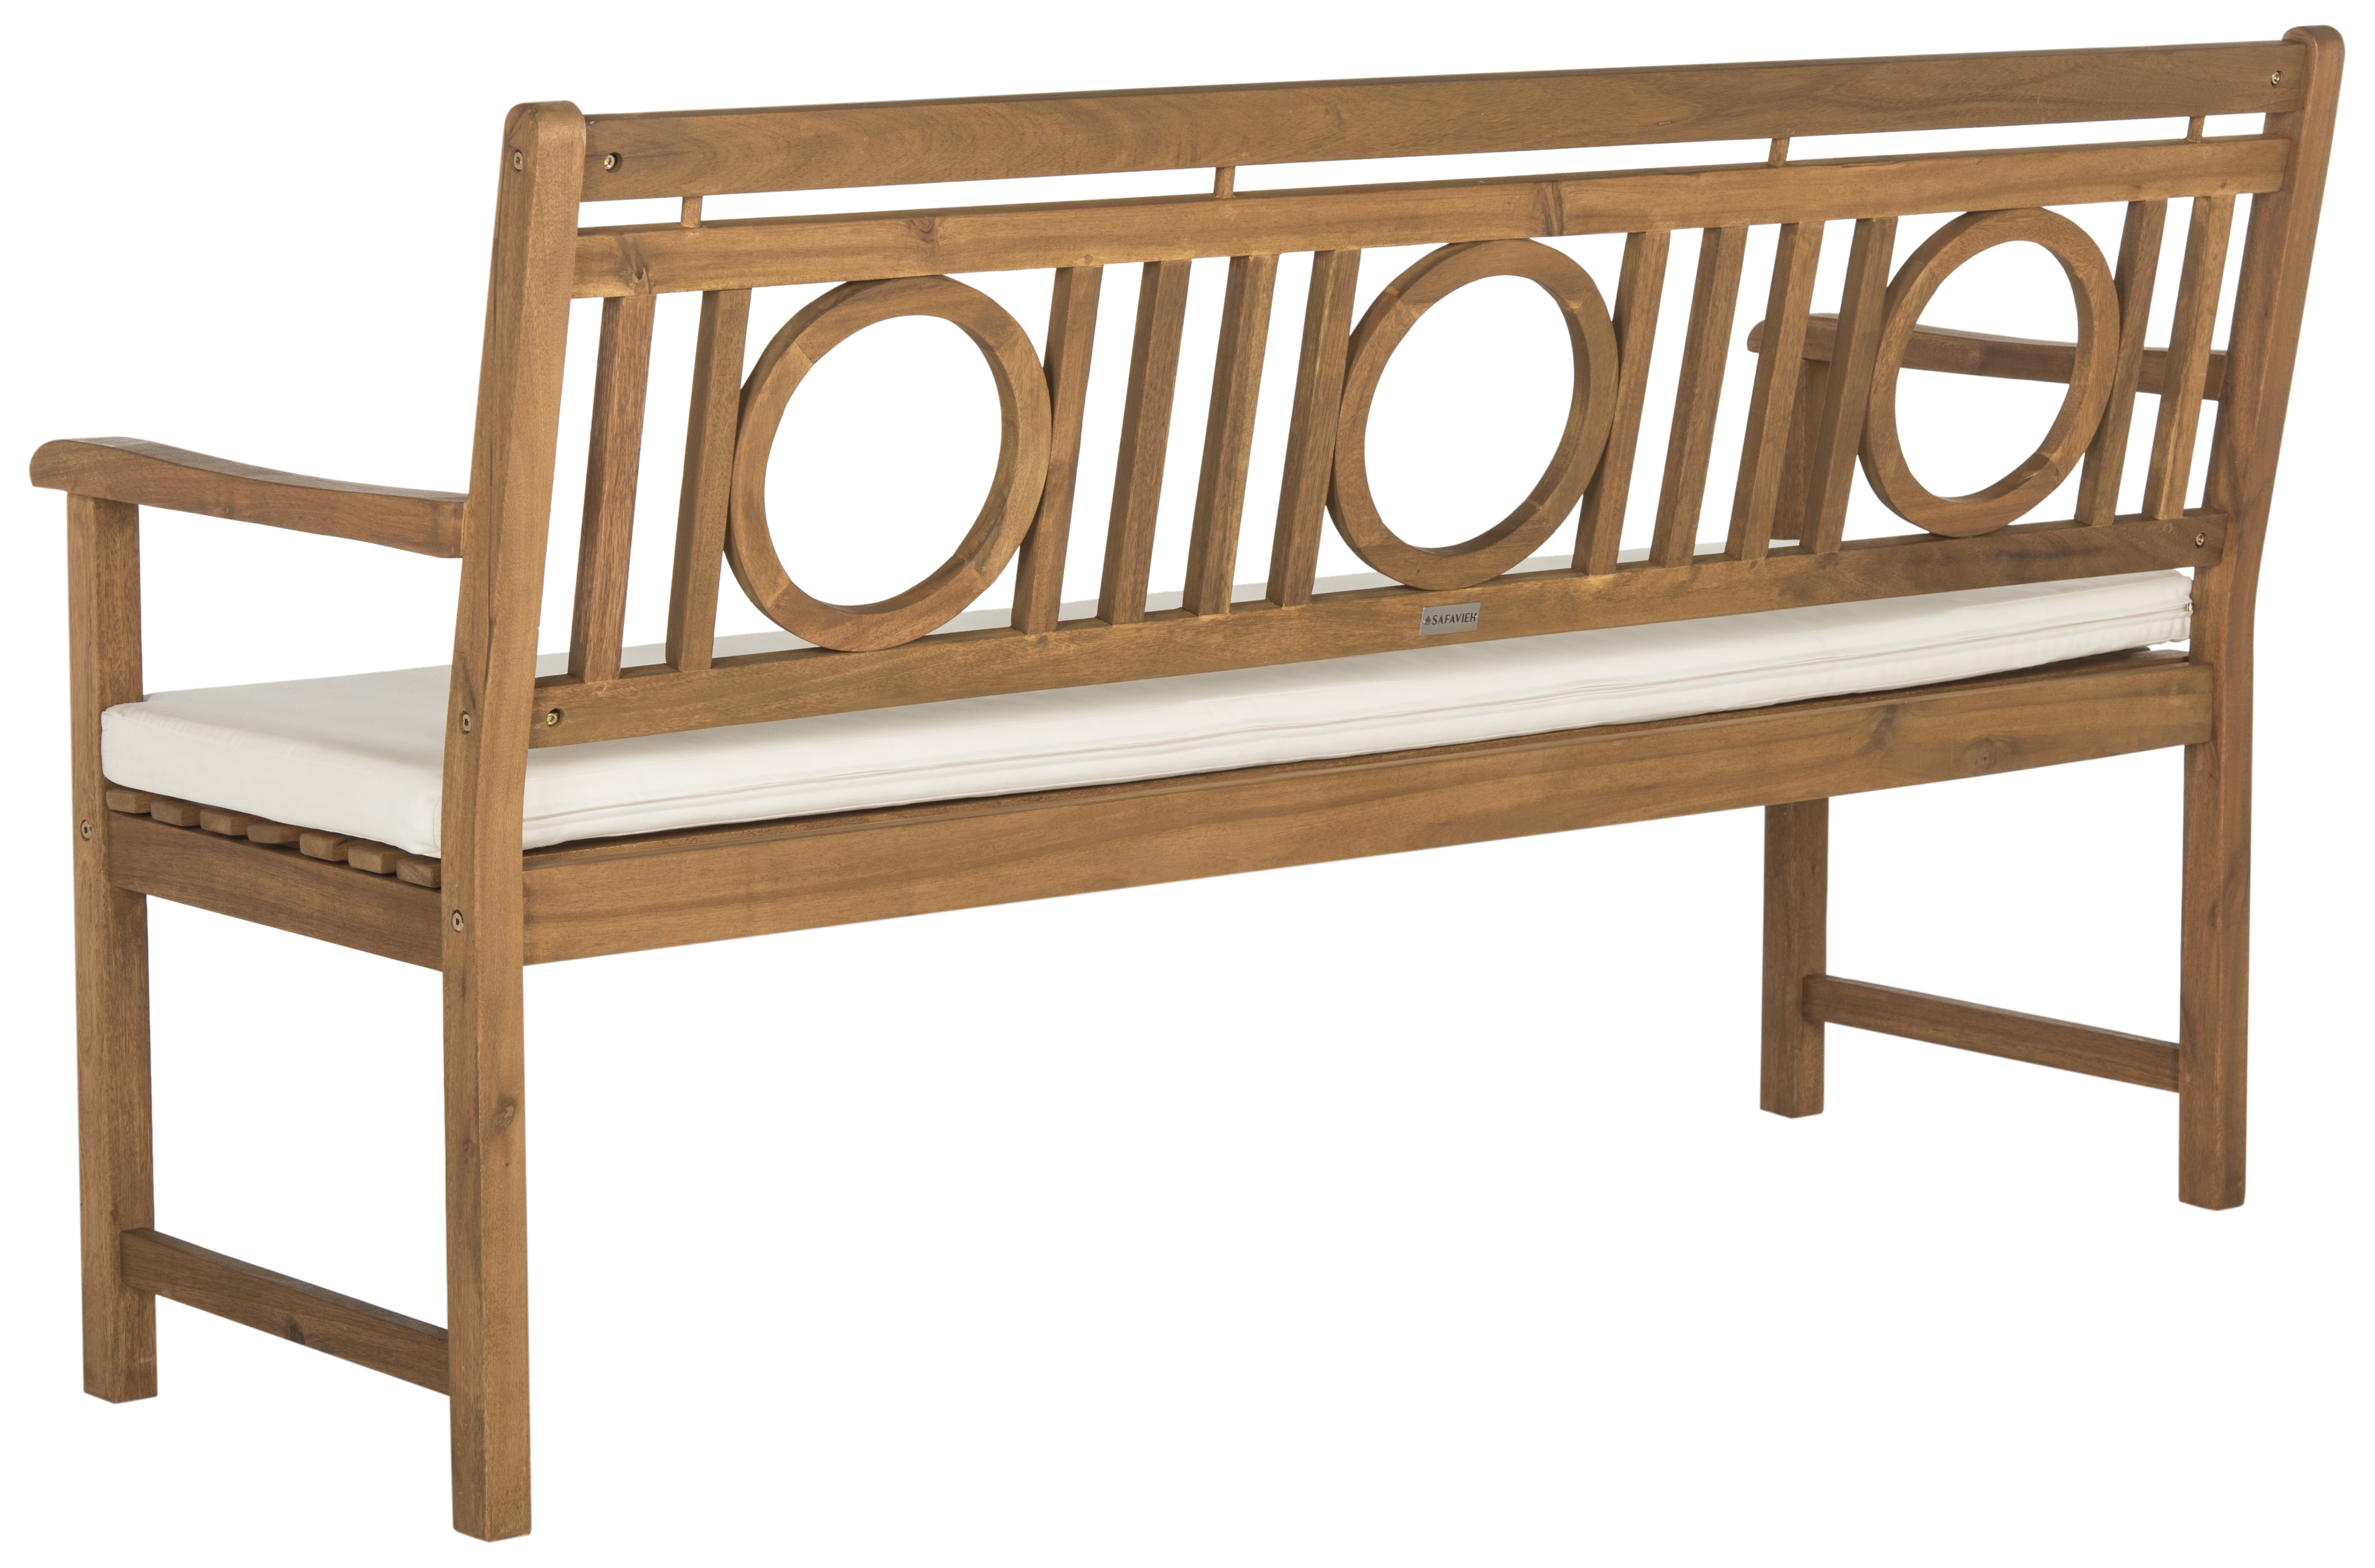 Montclair 3 Seat Bench - Natural/Beige - Arlo Home - Image 2